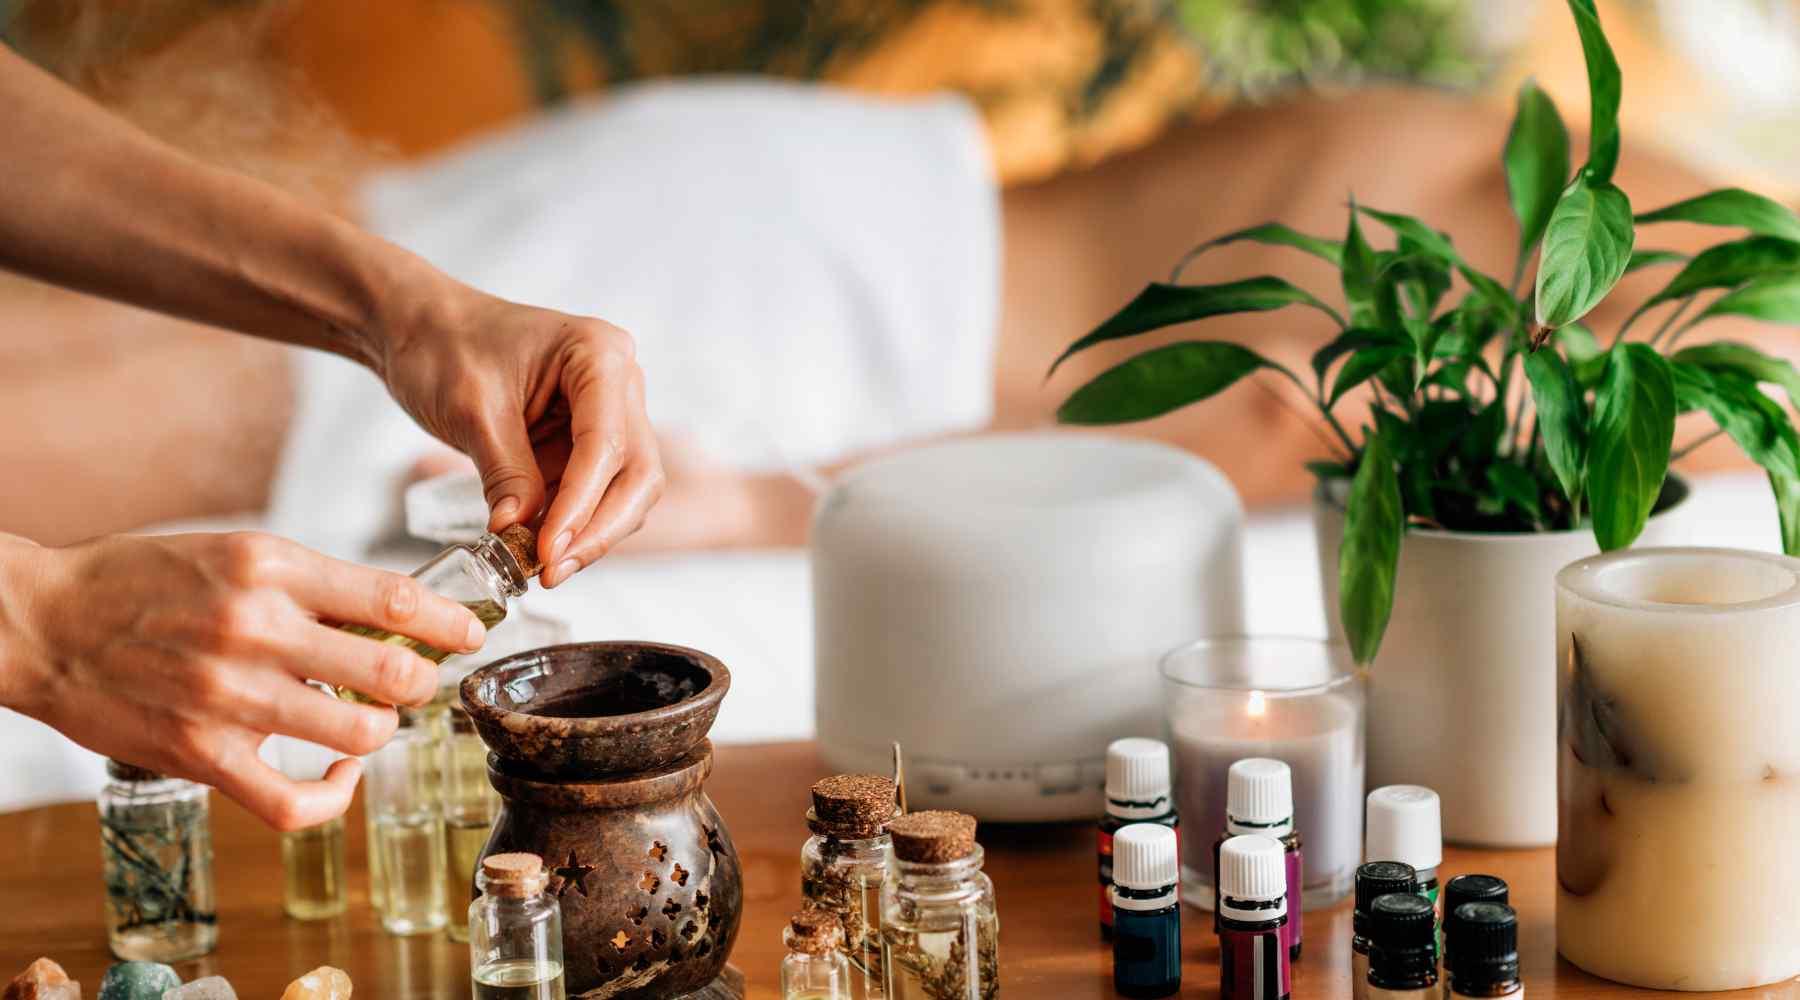 Masculine Diffuser Blends Instagram Stories for Him Young Living